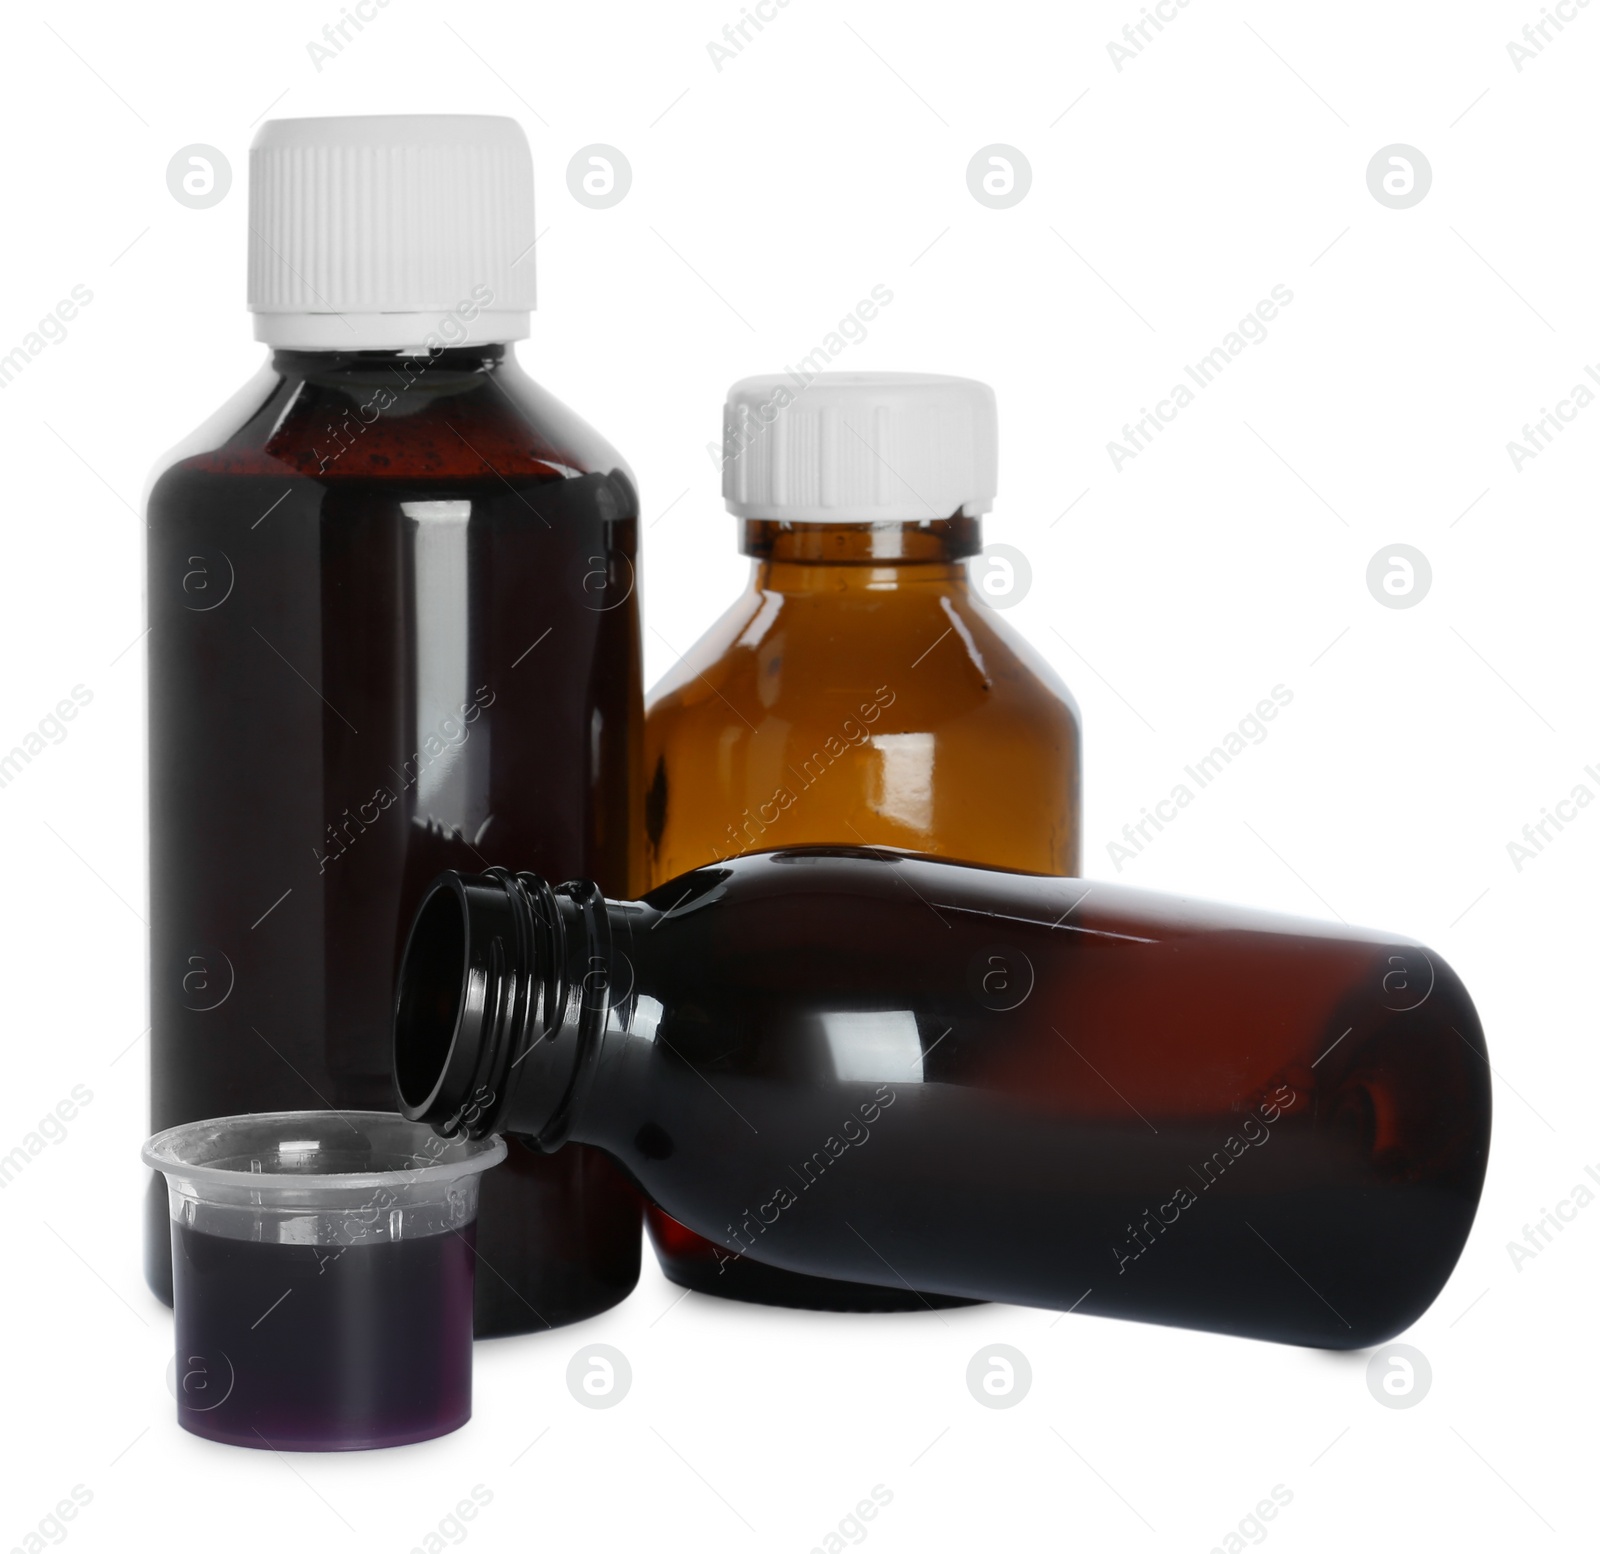 Photo of Bottles of cough syrup and measuring cup on white background